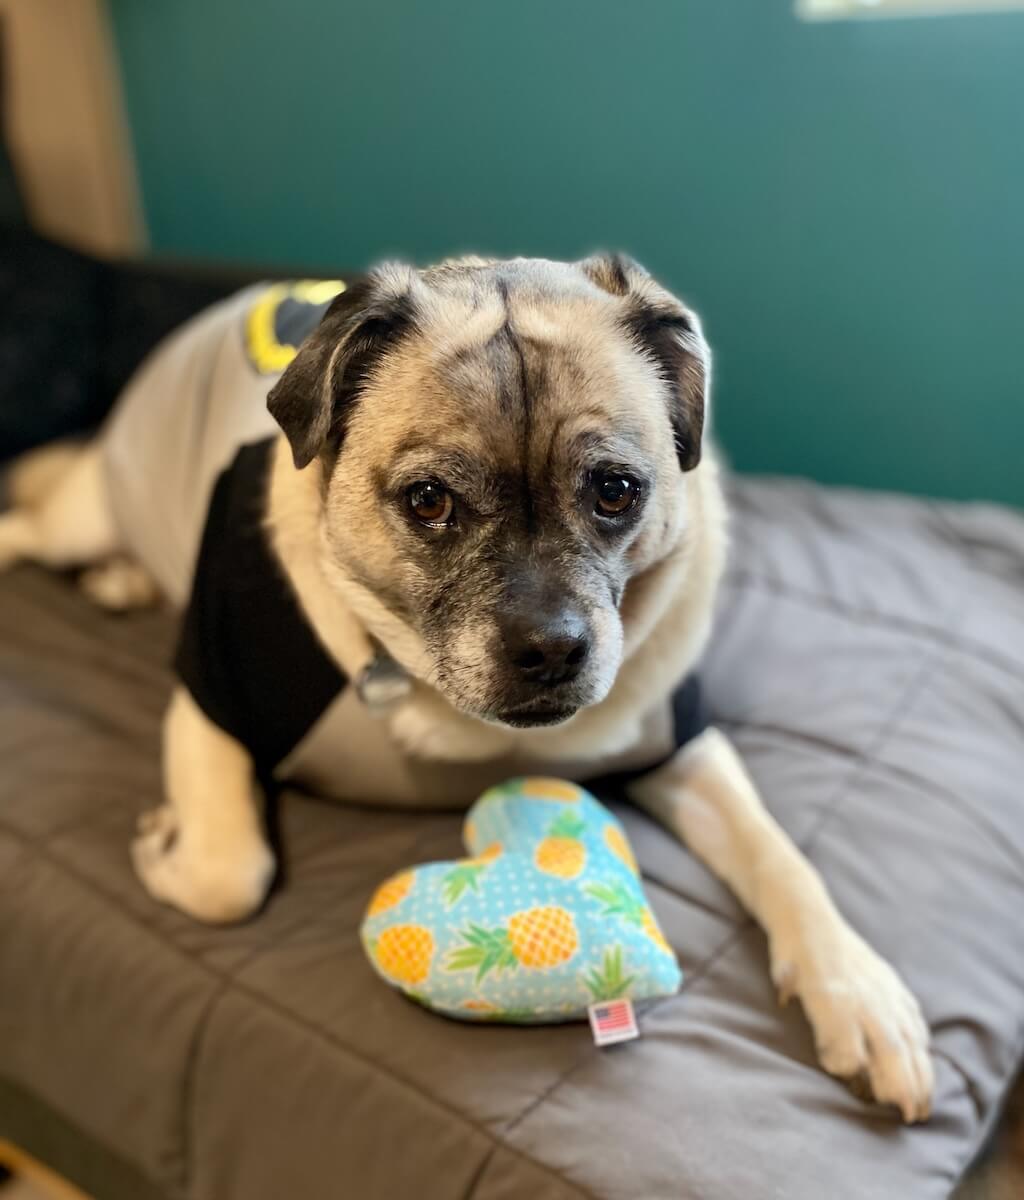 Dog posing with heart pineapple squeaker toy.